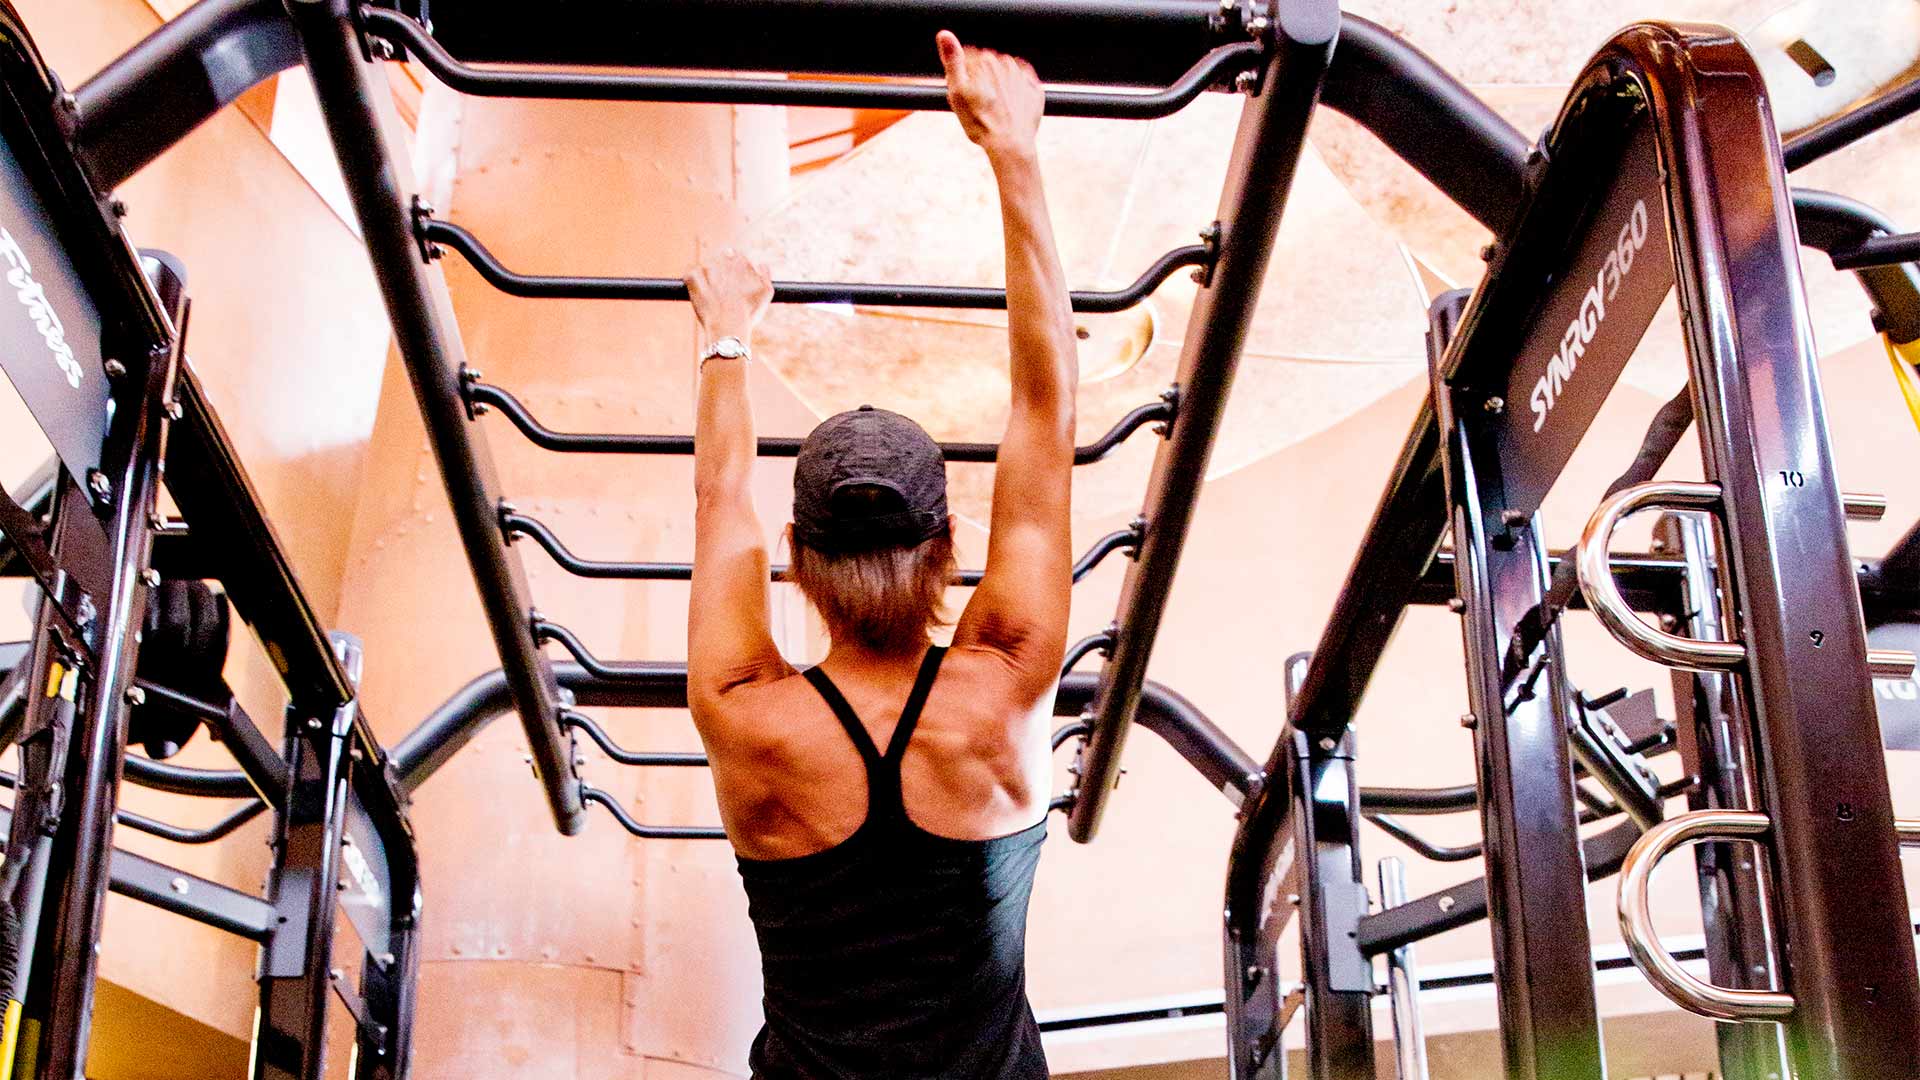 a woman in a black workout tank top and hat is working her way across rungs like monkey bars